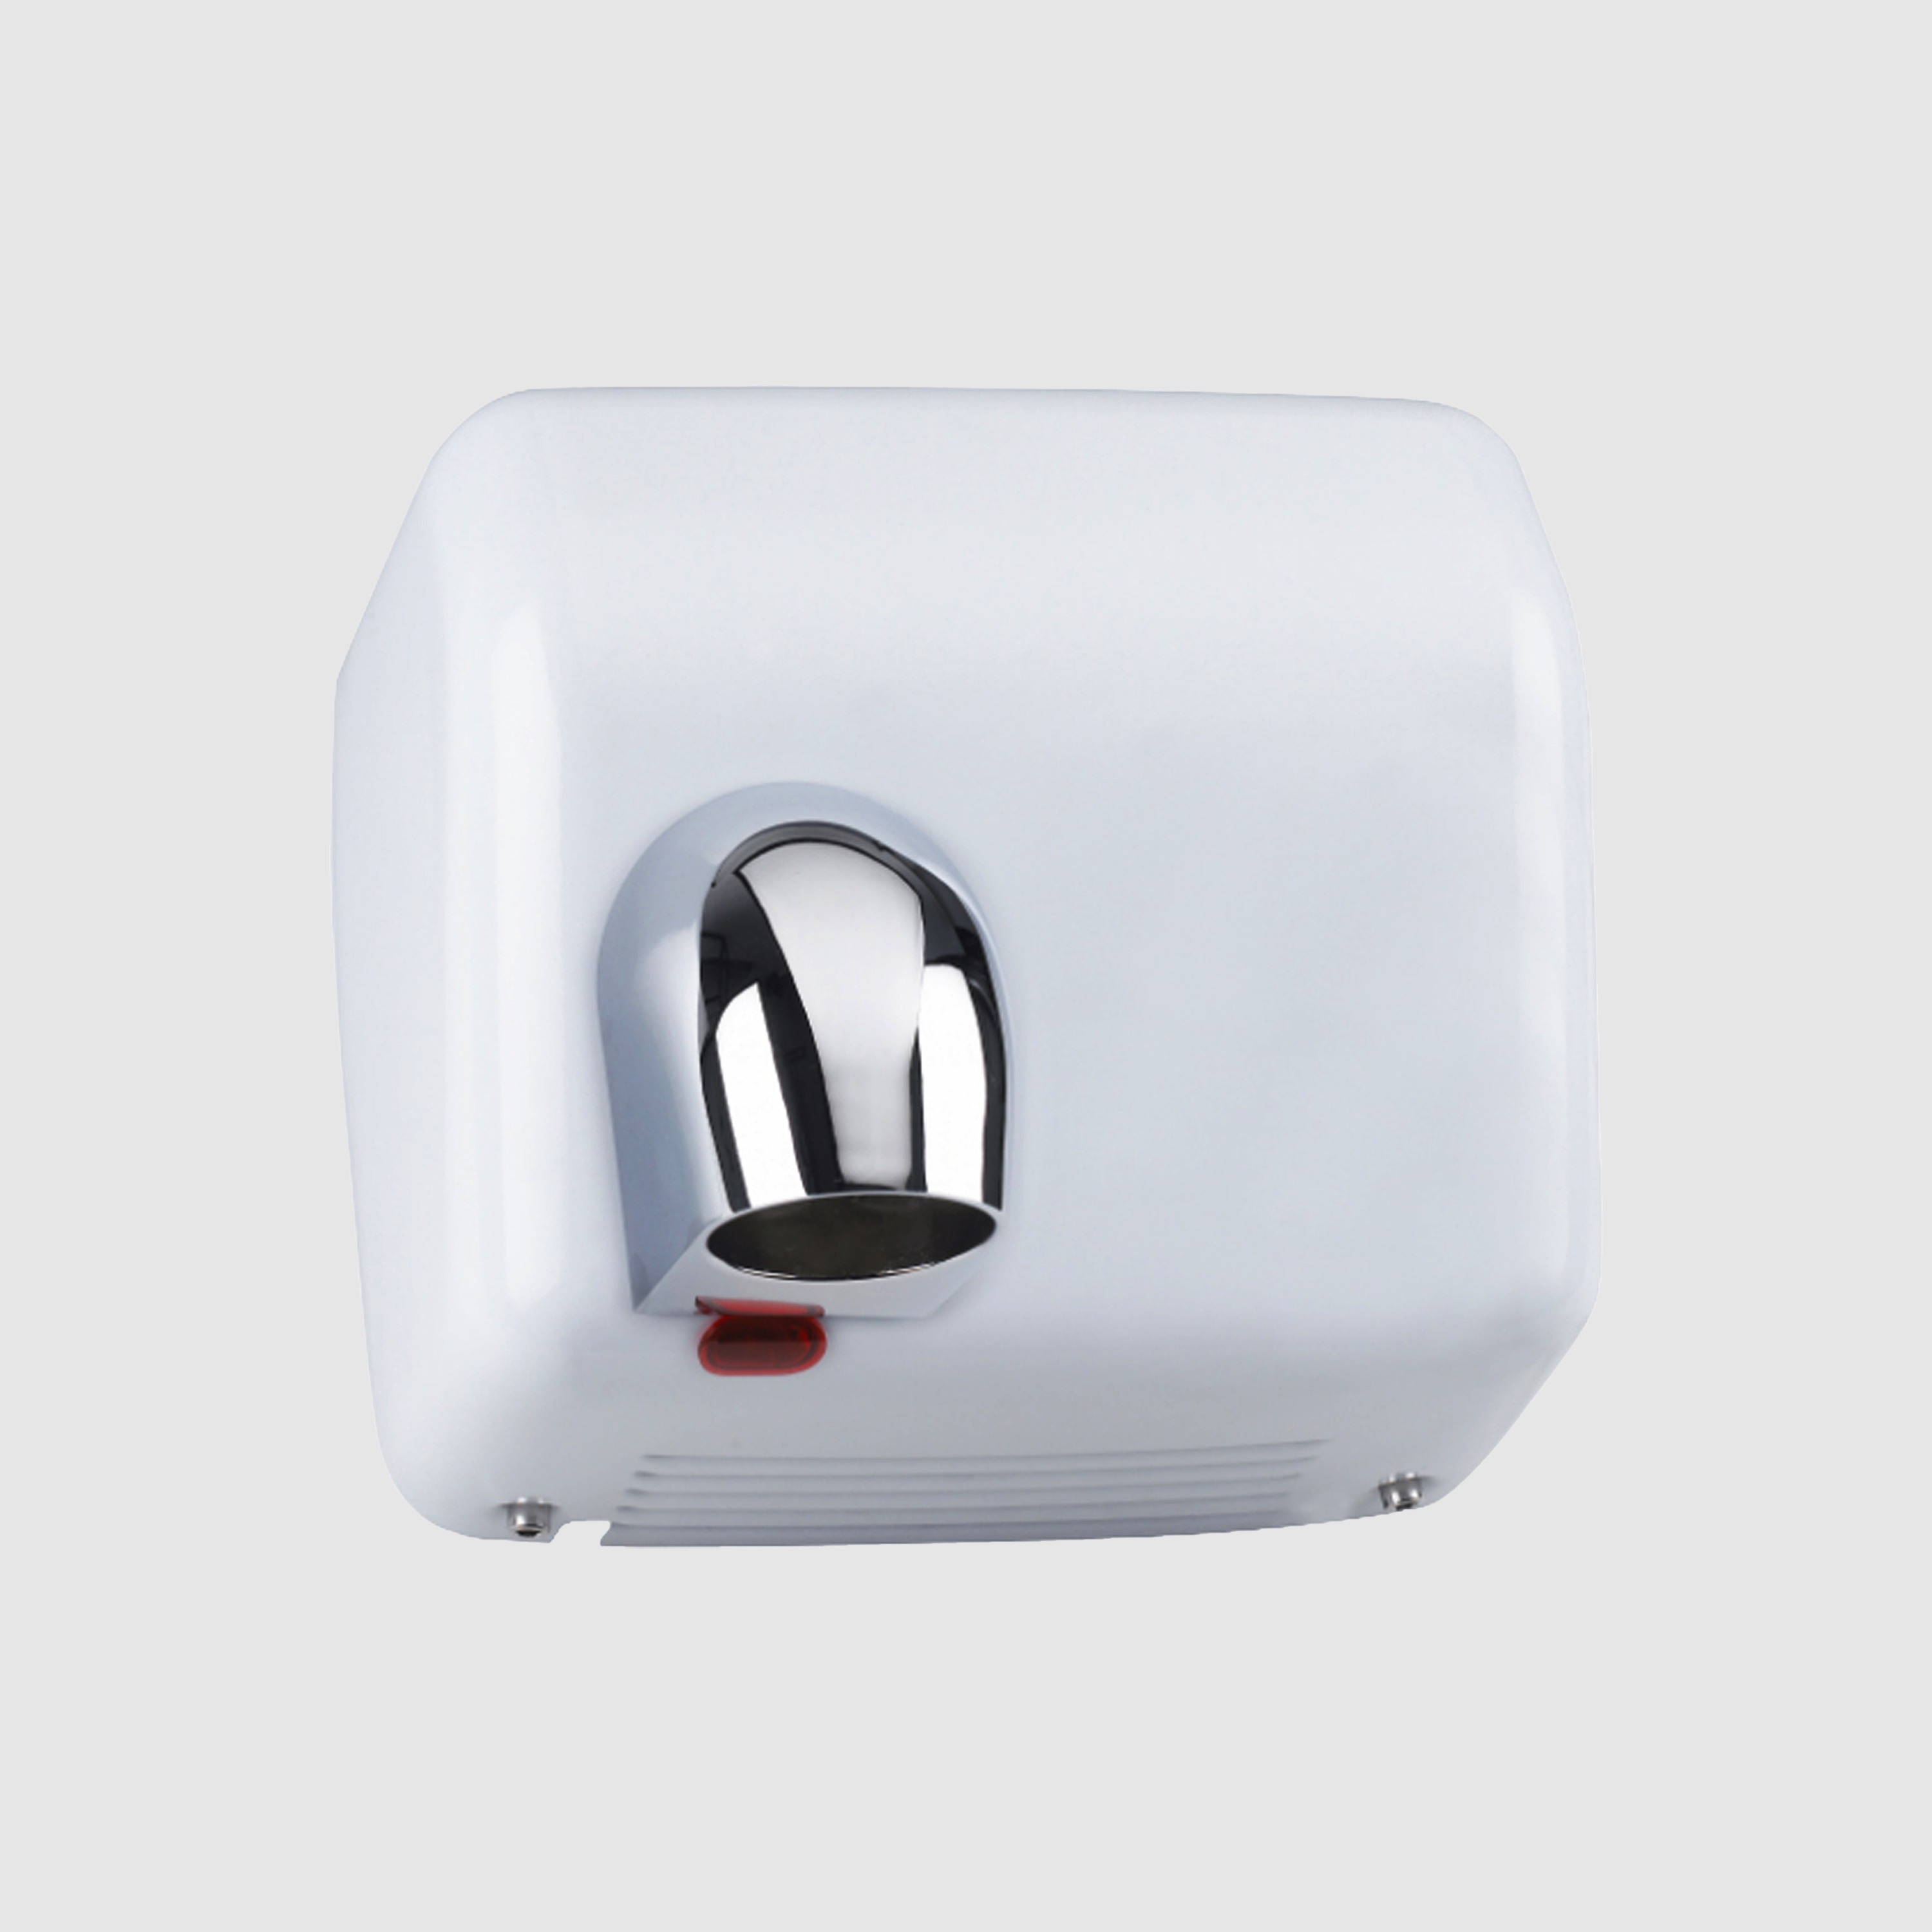 Hiflow Push-Button Operated Hand Dryer